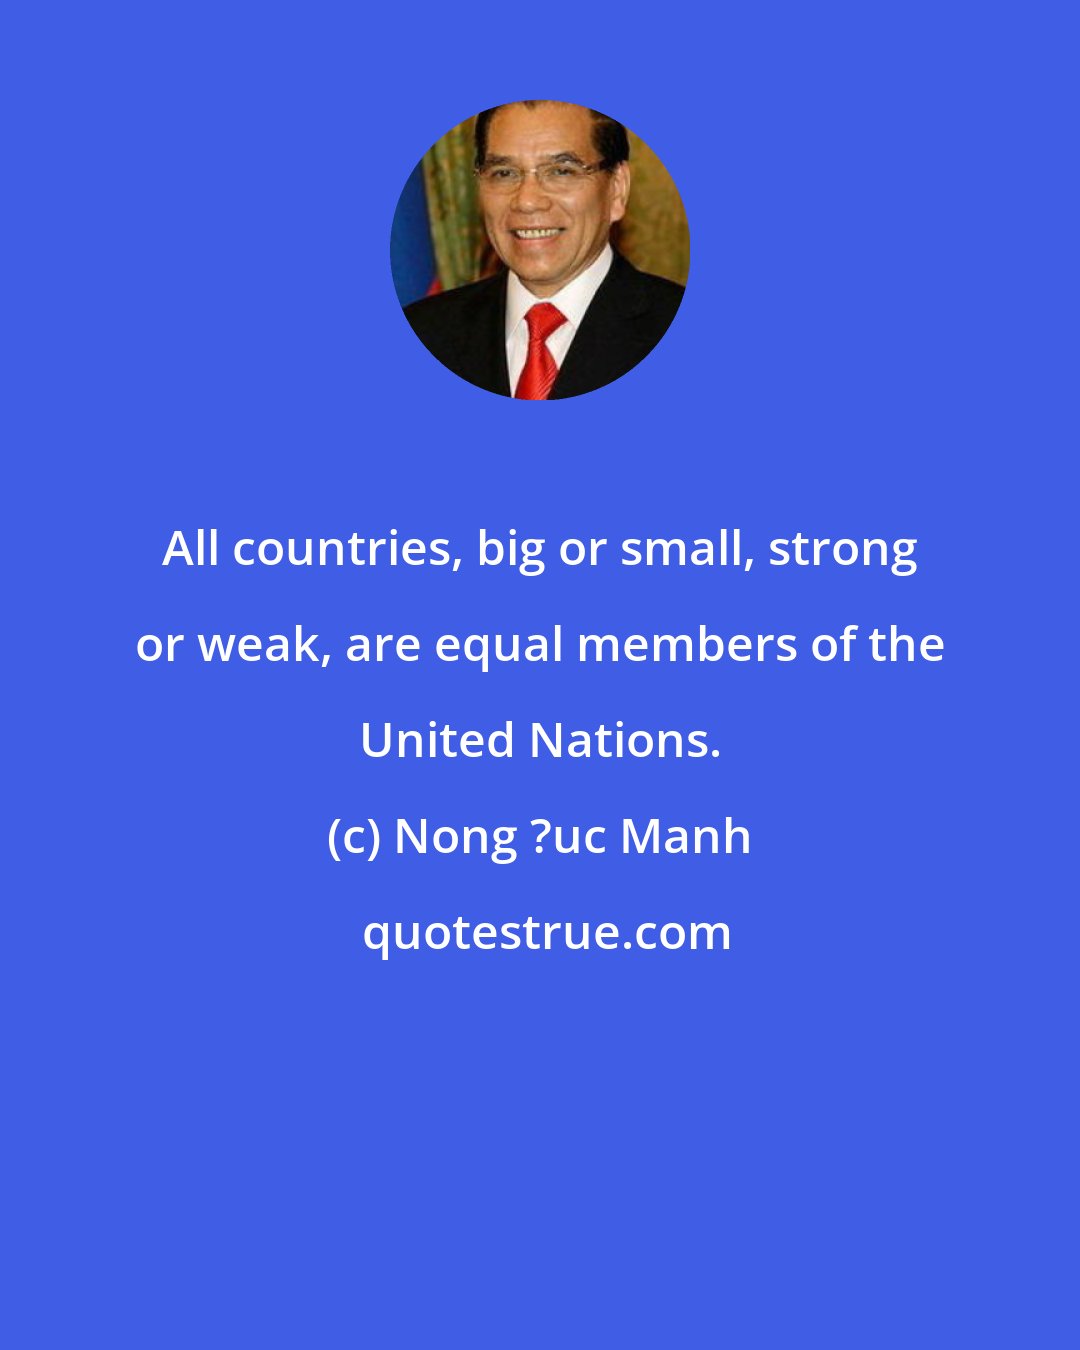 Nong ?uc Manh: All countries, big or small, strong or weak, are equal members of the United Nations.